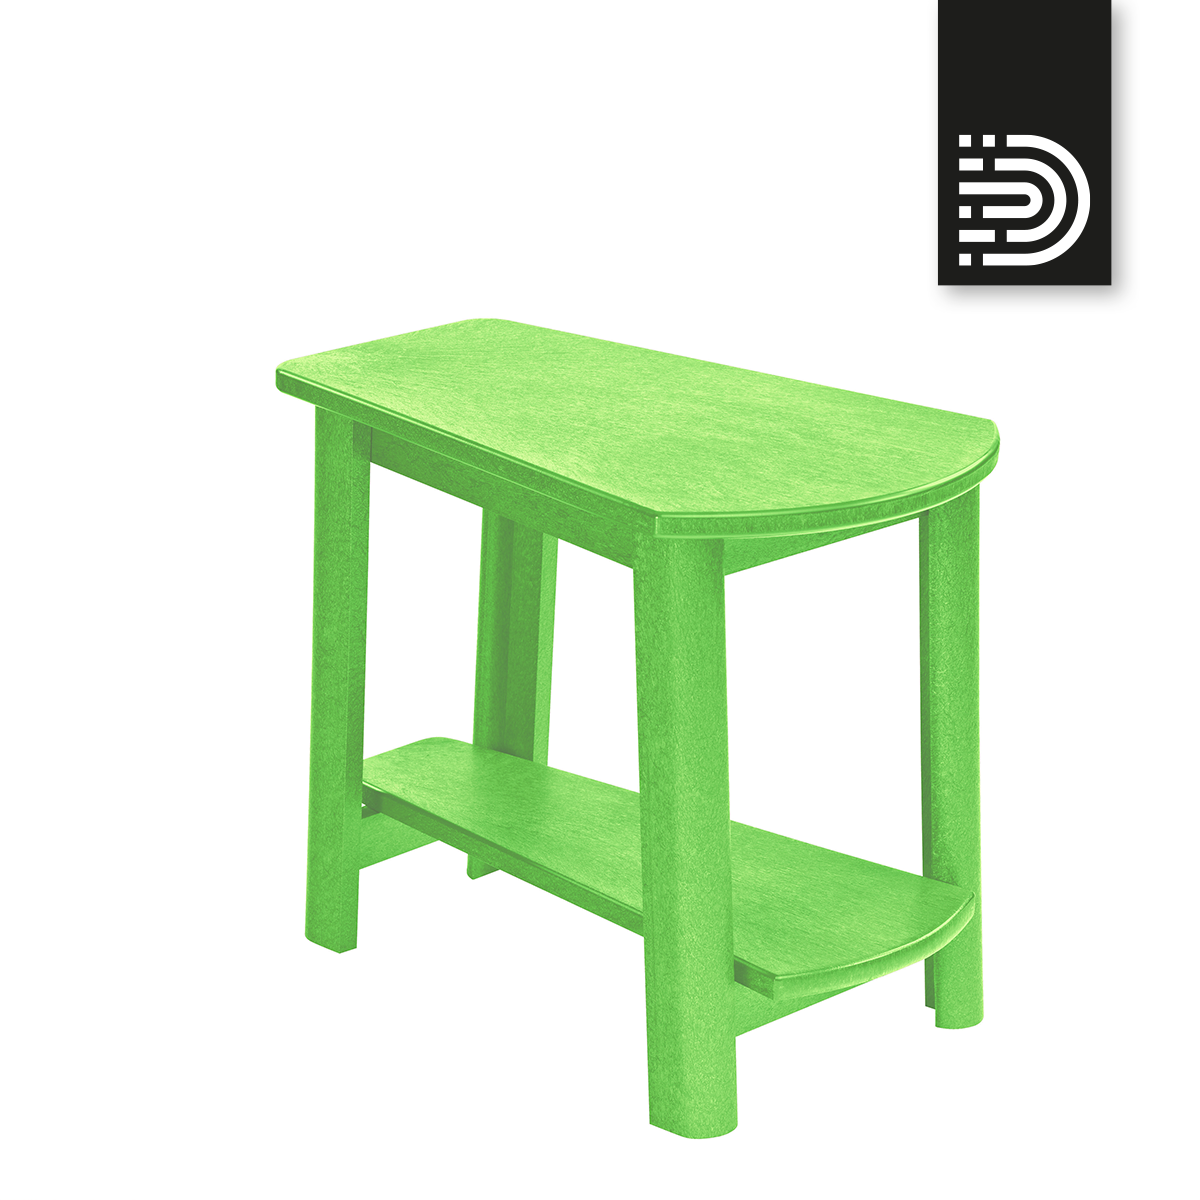 T04 Addy Side Table - Lime green 15